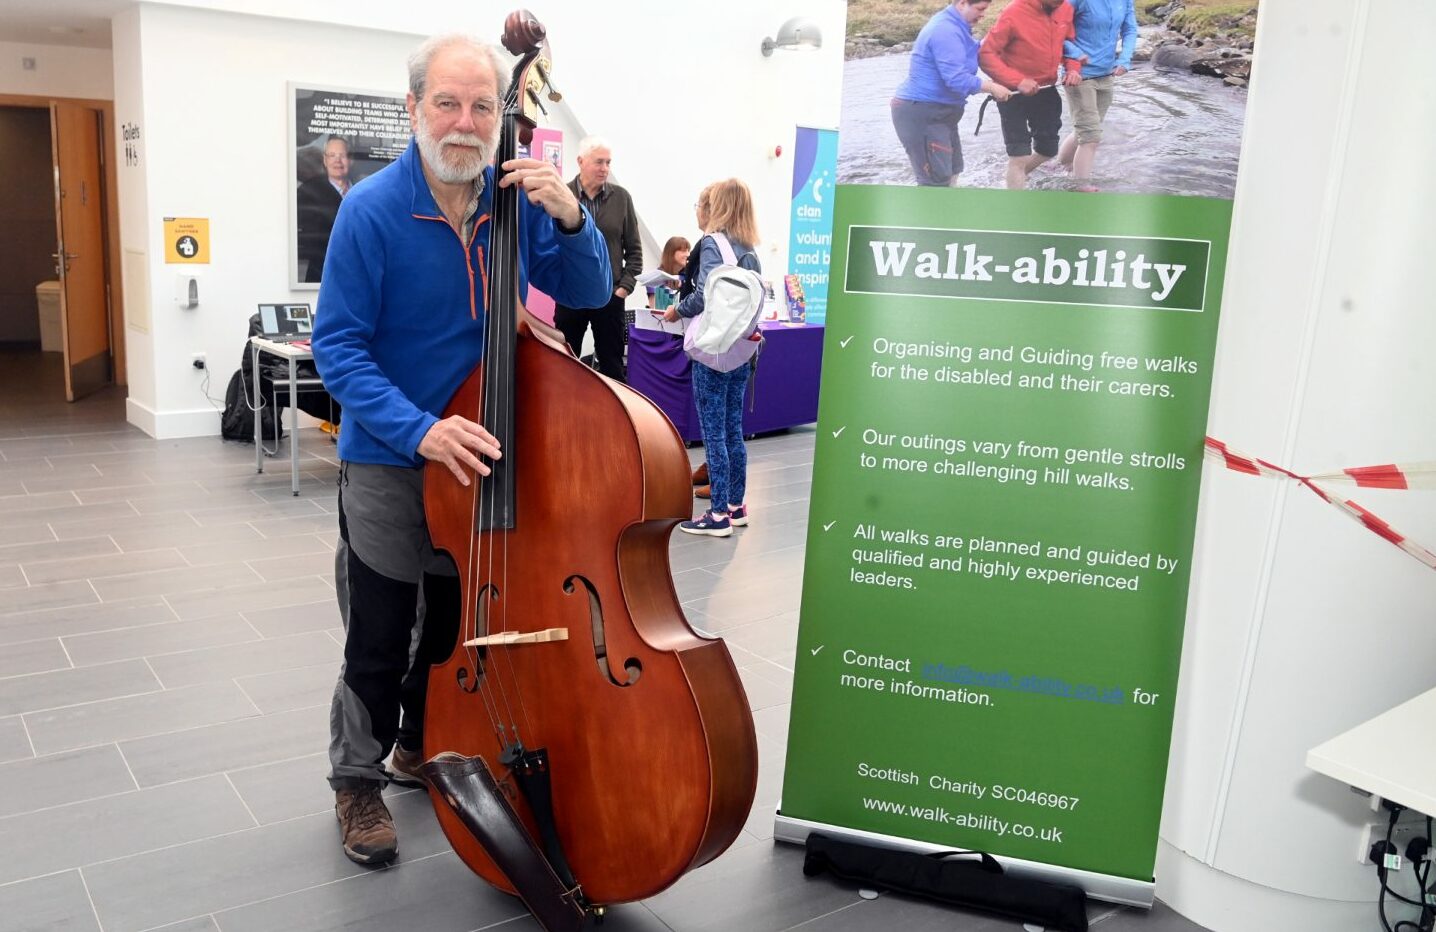 David has spoken about his experience for World Stroke Day. Image: Chris Sumner/ DC Thomson